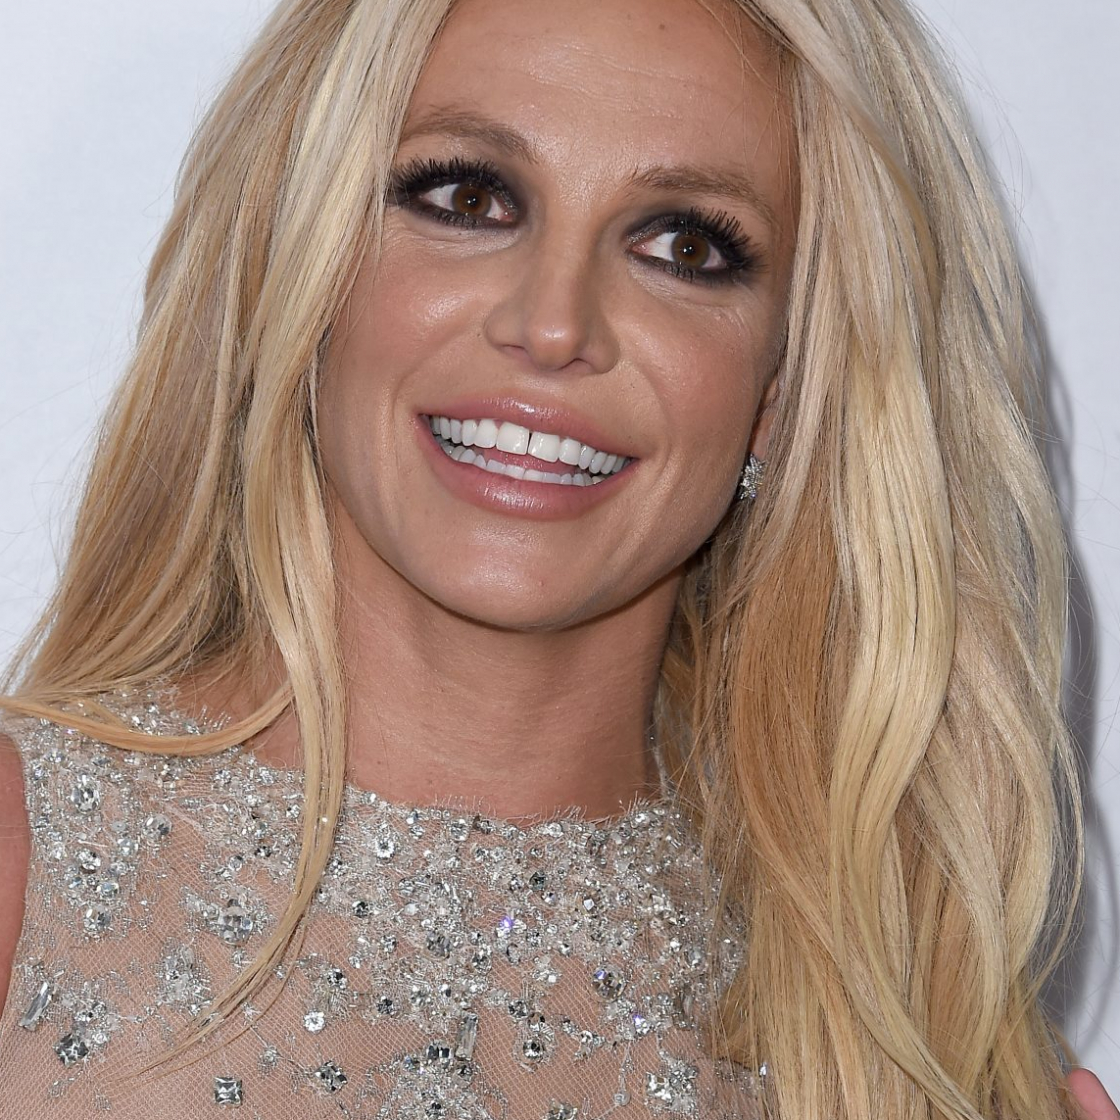 The shocking reaction to Britney's holiday photos shows misogyny is alive  and kicking